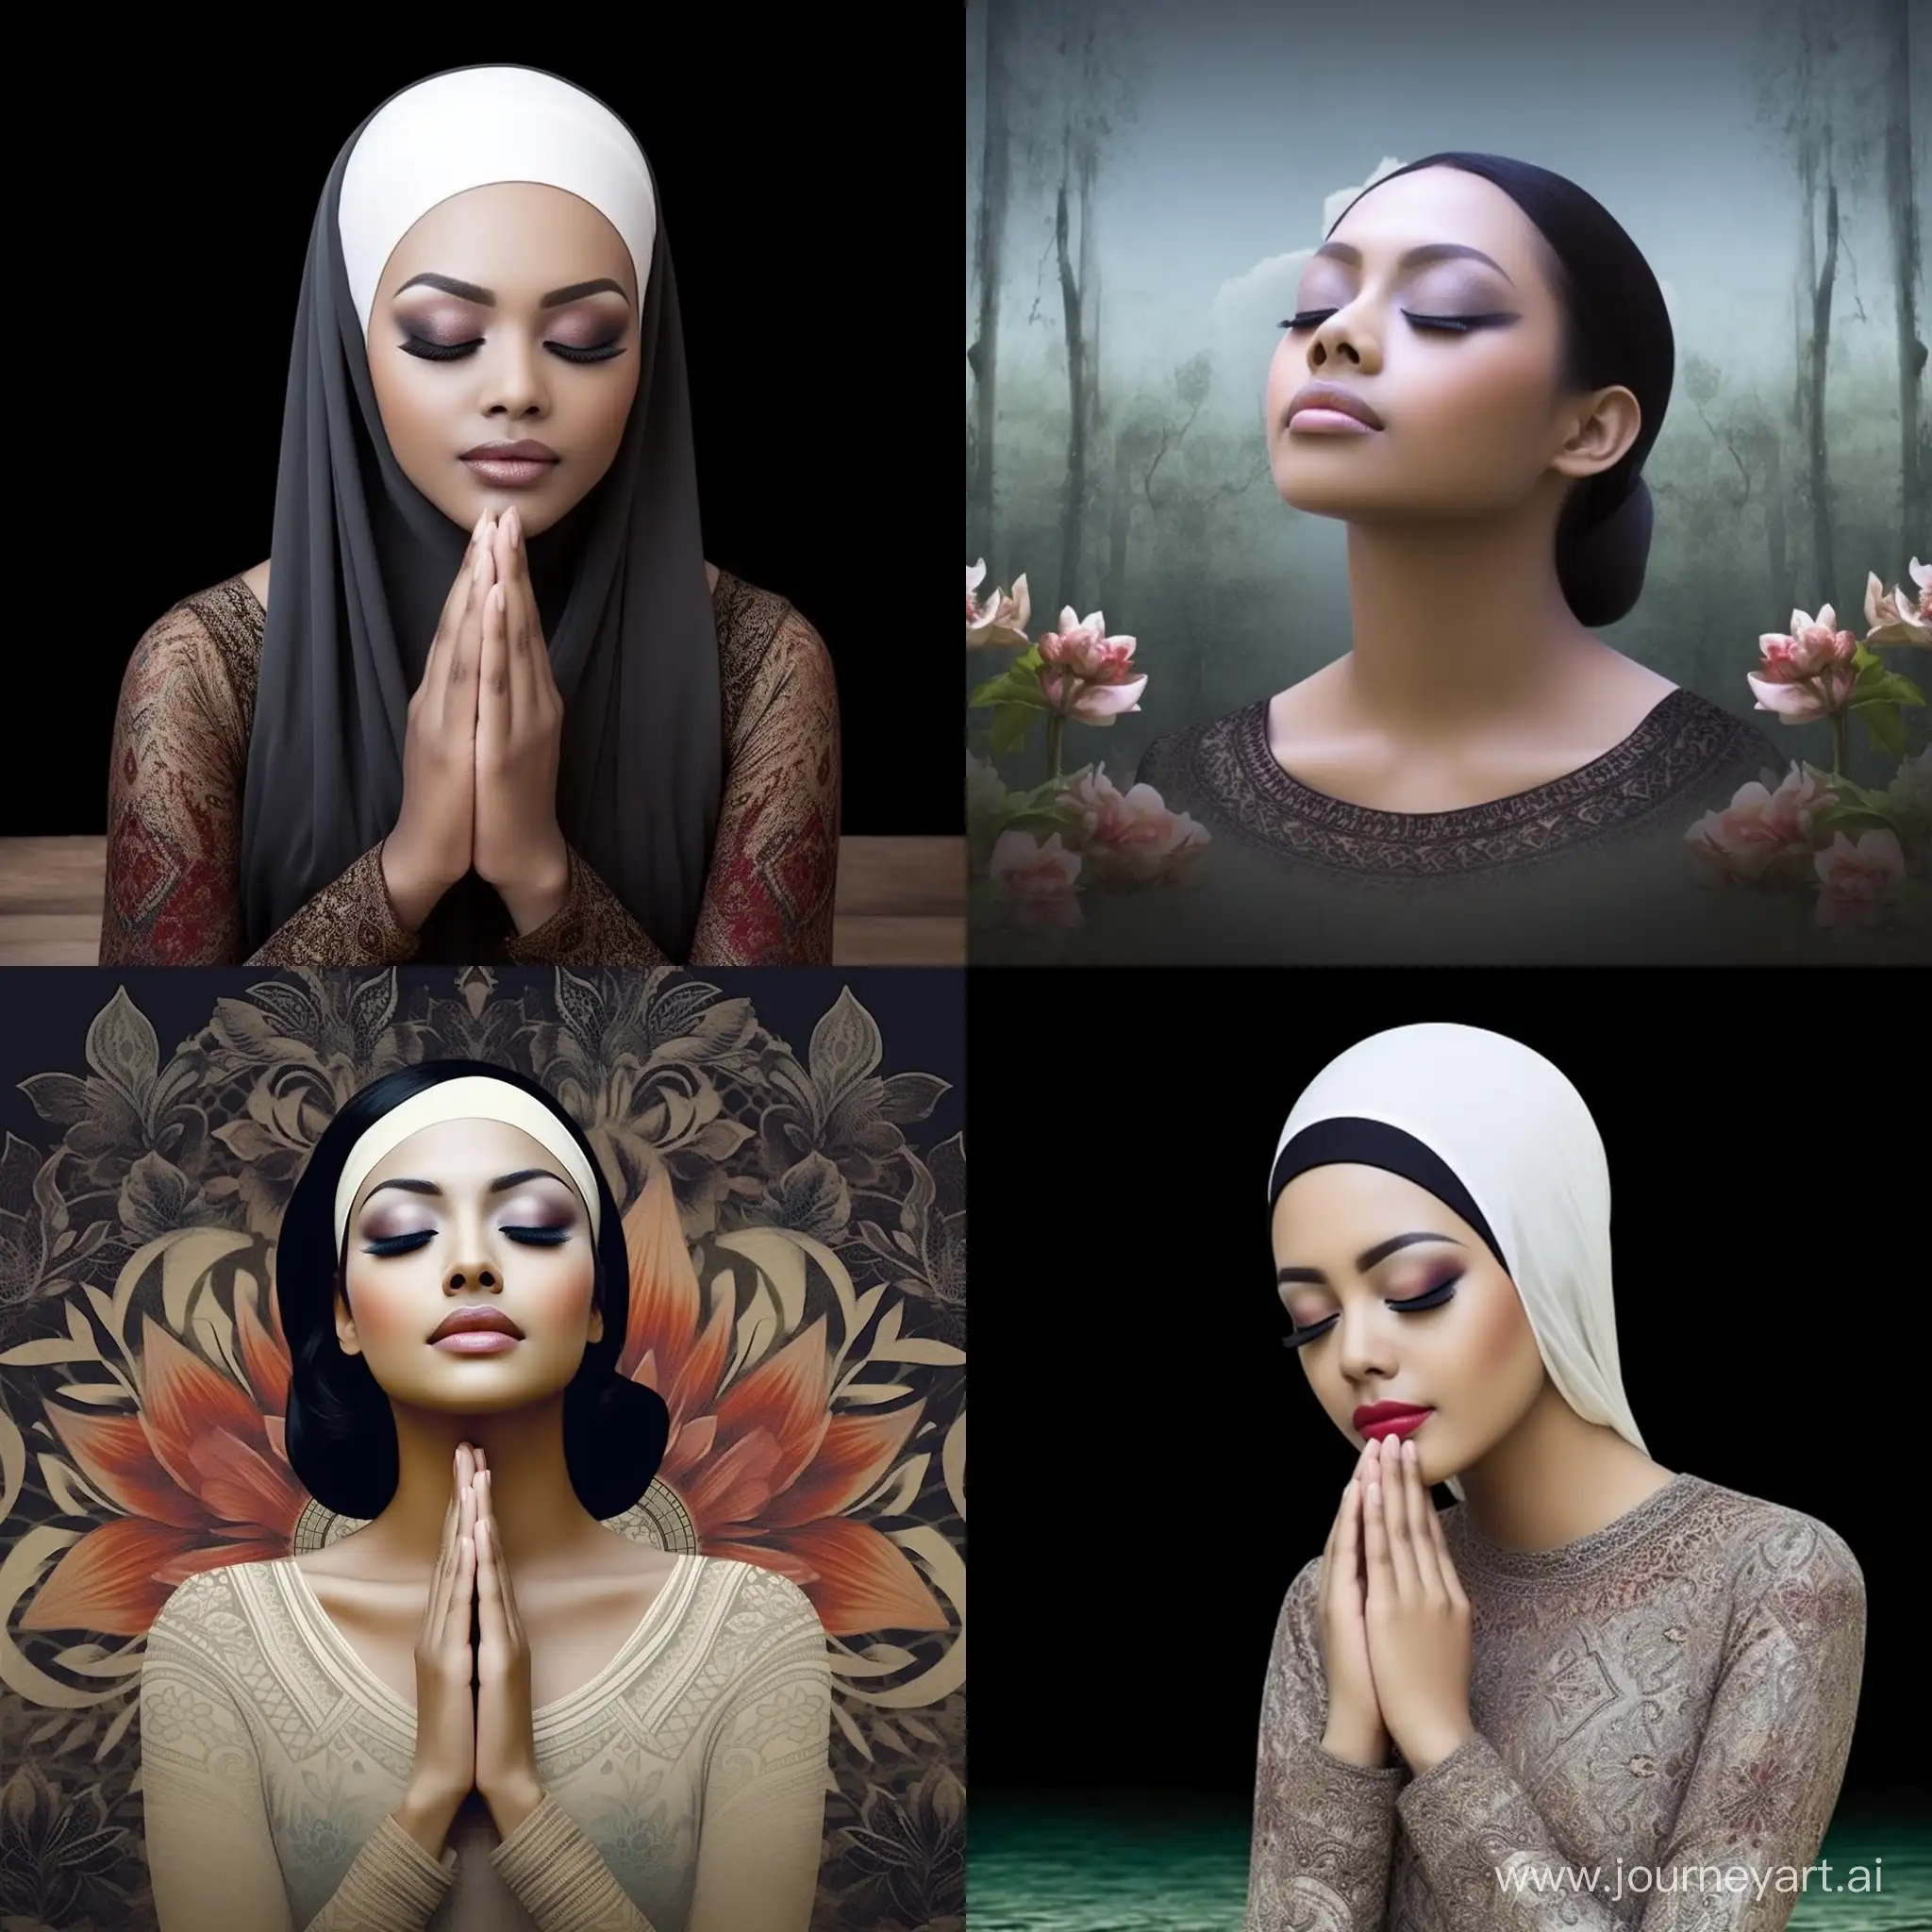 Beautiful Malay woman with white tone skin aged 22 years old, expressing pleasure and closed eyes.